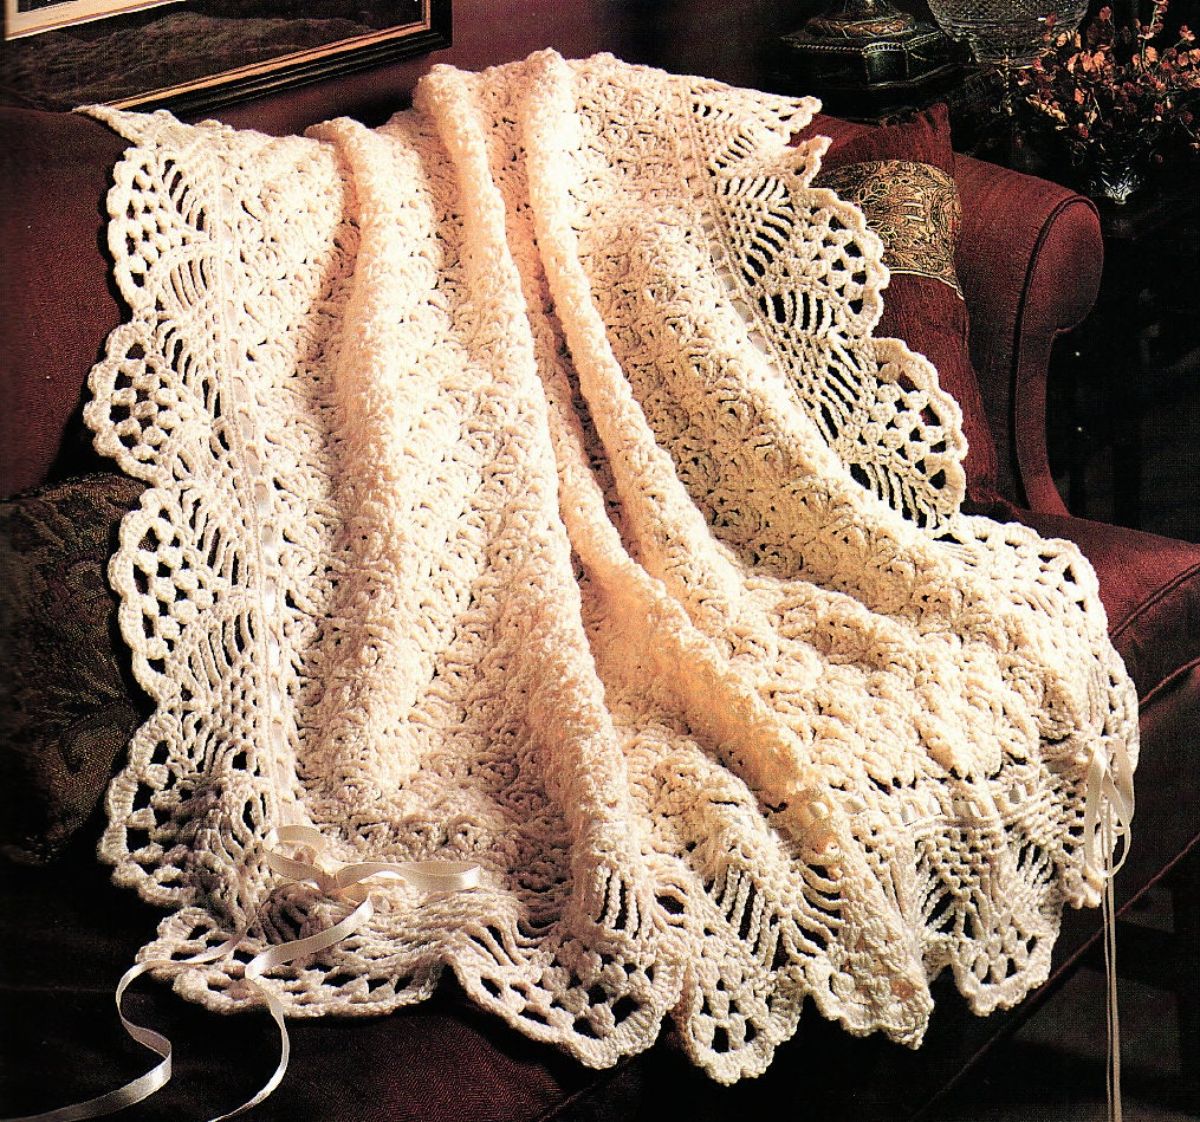 Light pink Victorian style crochet baby blankets with a large lace trim on all sides draped over a couch.